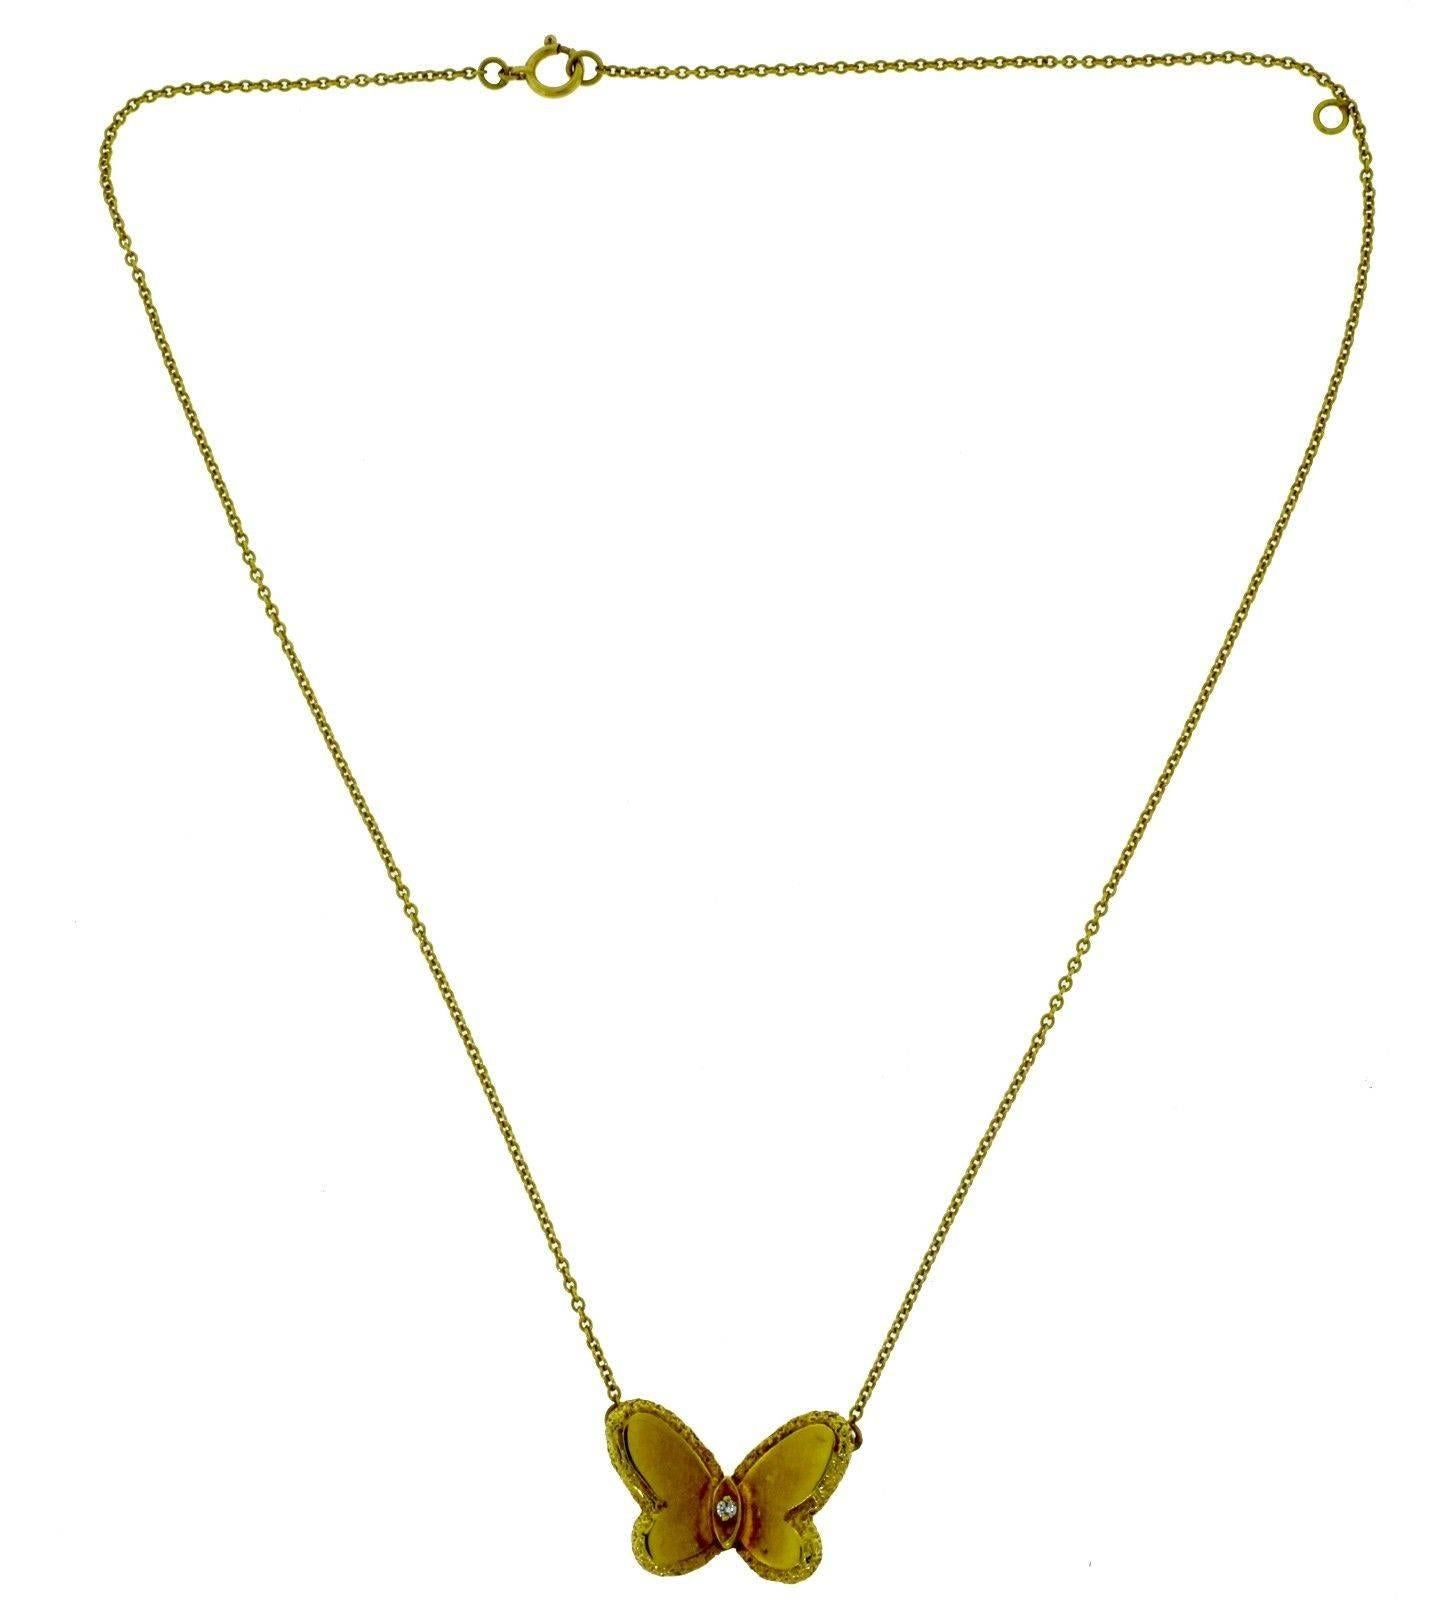 Van Cleef & Arpels is distinguished by their unique, timeless elegance.


Type: Butterfly Pendant Necklace
Designer: Van Cleef & Arpels
Metal: Green Gold
Stone: 1 Round Brilliant Cut Diamond
Chain Length: 12.5